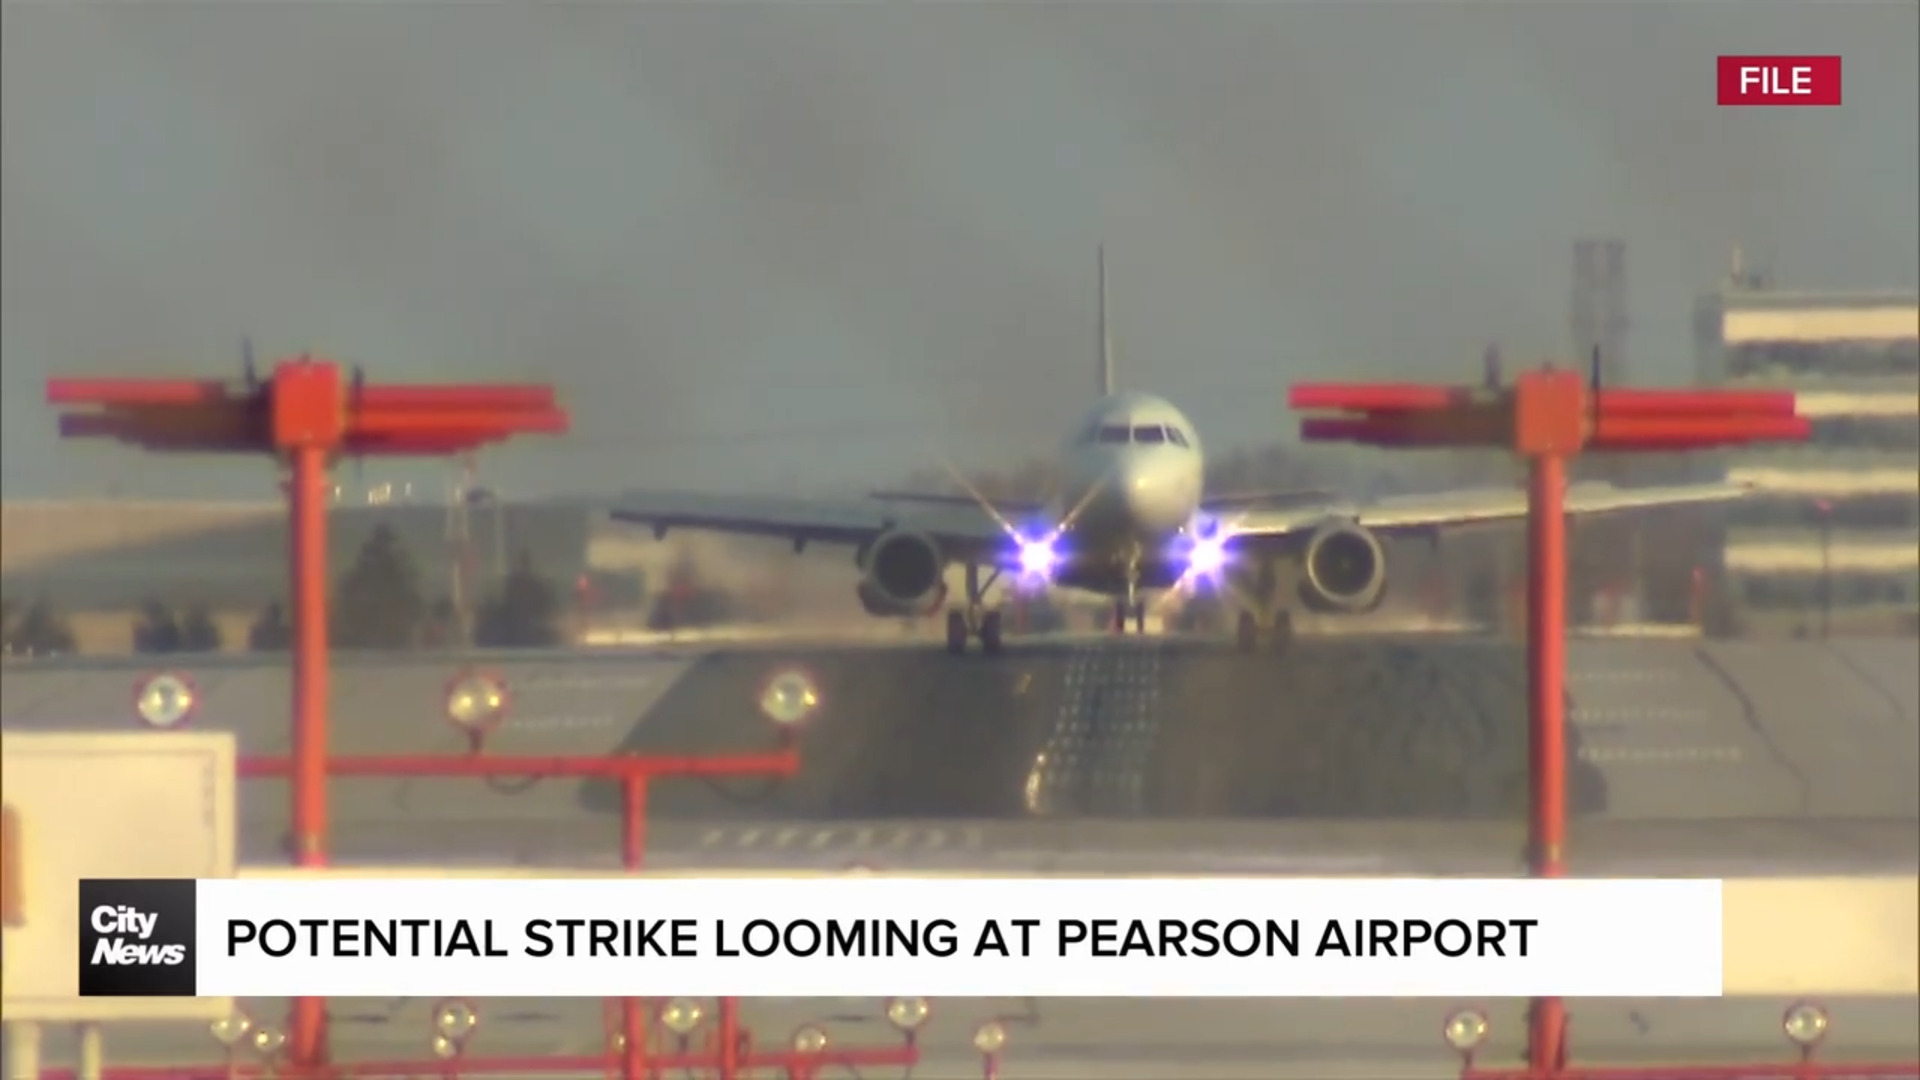 Flight delays possible at Pearson airport this week as potential strike looms among food service workers